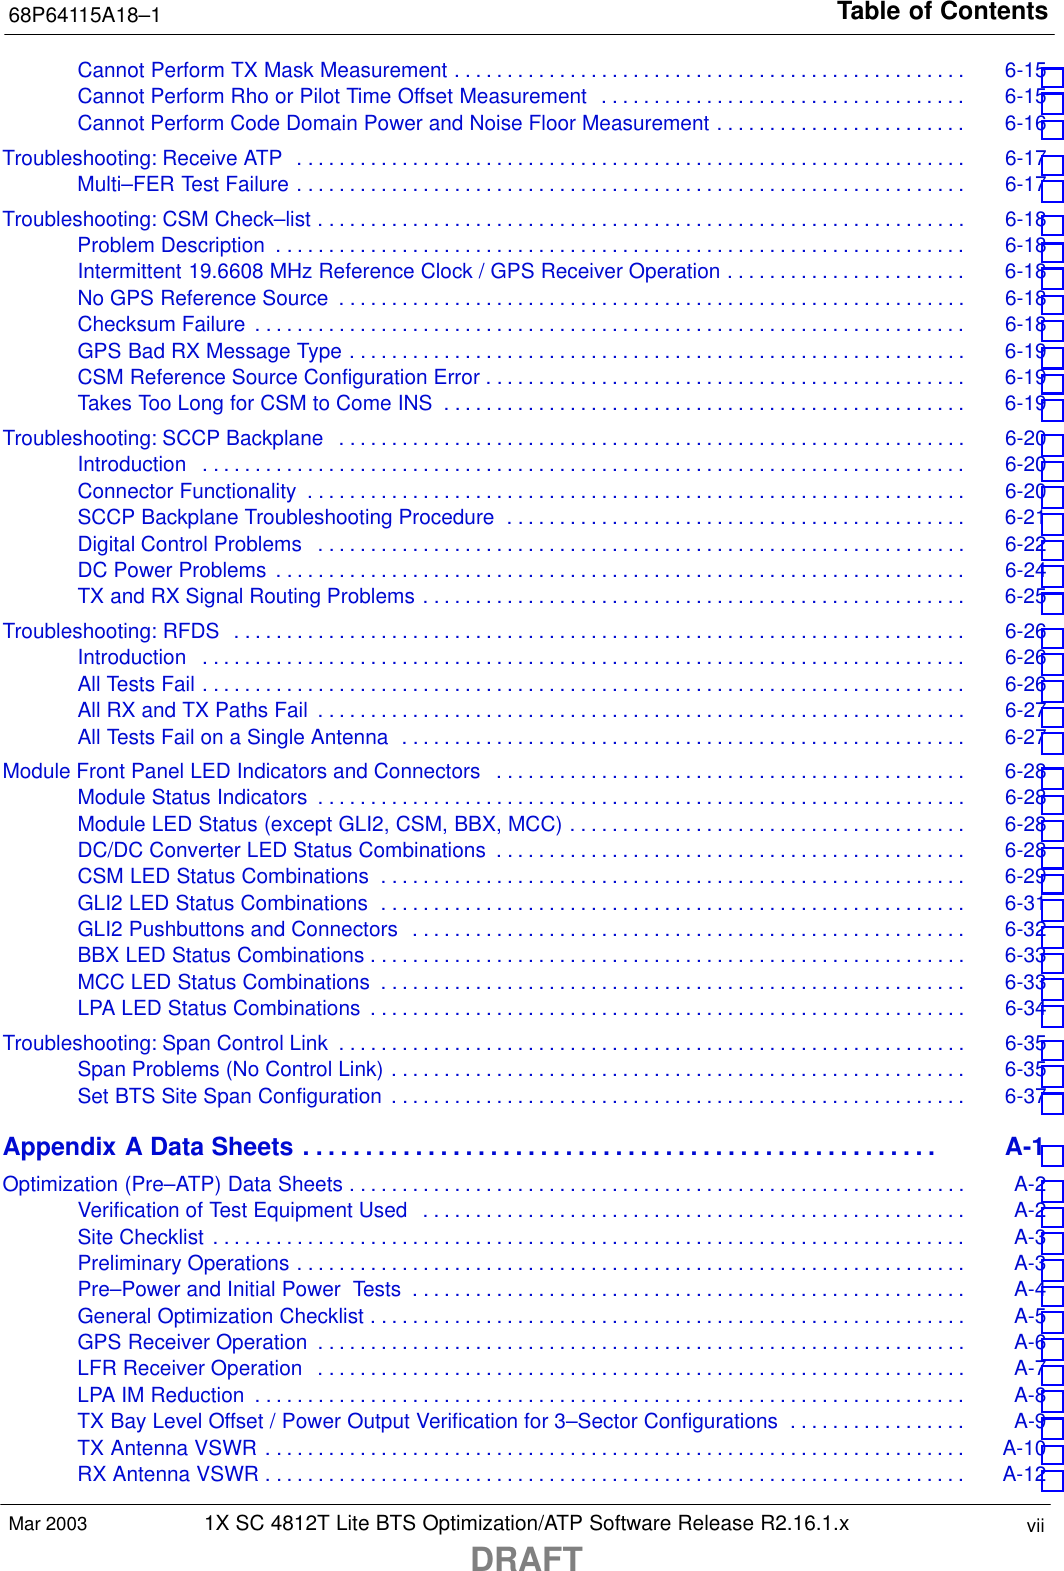 Table of Contents68P64115A18–11X SC 4812T Lite BTS Optimization/ATP Software Release R2.16.1.xDRAFTviiMar 2003Cannot Perform TX Mask Measurement 6-15 . . . . . . . . . . . . . . . . . . . . . . . . . . . . . . . . . . . . . . . . . . . . . . . . . Cannot Perform Rho or Pilot Time Offset Measurement 6-15 . . . . . . . . . . . . . . . . . . . . . . . . . . . . . . . . . . . Cannot Perform Code Domain Power and Noise Floor Measurement 6-16 . . . . . . . . . . . . . . . . . . . . . . . . Troubleshooting: Receive ATP 6-17 . . . . . . . . . . . . . . . . . . . . . . . . . . . . . . . . . . . . . . . . . . . . . . . . . . . . . . . . . . . . . . . . Multi–FER Test Failure 6-17 . . . . . . . . . . . . . . . . . . . . . . . . . . . . . . . . . . . . . . . . . . . . . . . . . . . . . . . . . . . . . . . . Troubleshooting: CSM Check–list 6-18 . . . . . . . . . . . . . . . . . . . . . . . . . . . . . . . . . . . . . . . . . . . . . . . . . . . . . . . . . . . . . . Problem Description 6-18 . . . . . . . . . . . . . . . . . . . . . . . . . . . . . . . . . . . . . . . . . . . . . . . . . . . . . . . . . . . . . . . . . . Intermittent 19.6608 MHz Reference Clock / GPS Receiver Operation 6-18 . . . . . . . . . . . . . . . . . . . . . . . No GPS Reference Source 6-18 . . . . . . . . . . . . . . . . . . . . . . . . . . . . . . . . . . . . . . . . . . . . . . . . . . . . . . . . . . . . Checksum Failure 6-18 . . . . . . . . . . . . . . . . . . . . . . . . . . . . . . . . . . . . . . . . . . . . . . . . . . . . . . . . . . . . . . . . . . . . GPS Bad RX Message Type 6-19 . . . . . . . . . . . . . . . . . . . . . . . . . . . . . . . . . . . . . . . . . . . . . . . . . . . . . . . . . . . CSM Reference Source Configuration Error 6-19 . . . . . . . . . . . . . . . . . . . . . . . . . . . . . . . . . . . . . . . . . . . . . . Takes Too Long for CSM to Come INS 6-19 . . . . . . . . . . . . . . . . . . . . . . . . . . . . . . . . . . . . . . . . . . . . . . . . . . Troubleshooting: SCCP Backplane 6-20 . . . . . . . . . . . . . . . . . . . . . . . . . . . . . . . . . . . . . . . . . . . . . . . . . . . . . . . . . . . . Introduction 6-20 . . . . . . . . . . . . . . . . . . . . . . . . . . . . . . . . . . . . . . . . . . . . . . . . . . . . . . . . . . . . . . . . . . . . . . . . . Connector Functionality 6-20 . . . . . . . . . . . . . . . . . . . . . . . . . . . . . . . . . . . . . . . . . . . . . . . . . . . . . . . . . . . . . . . SCCP Backplane Troubleshooting Procedure 6-21 . . . . . . . . . . . . . . . . . . . . . . . . . . . . . . . . . . . . . . . . . . . . Digital Control Problems 6-22 . . . . . . . . . . . . . . . . . . . . . . . . . . . . . . . . . . . . . . . . . . . . . . . . . . . . . . . . . . . . . . DC Power Problems 6-24 . . . . . . . . . . . . . . . . . . . . . . . . . . . . . . . . . . . . . . . . . . . . . . . . . . . . . . . . . . . . . . . . . . TX and RX Signal Routing Problems 6-25 . . . . . . . . . . . . . . . . . . . . . . . . . . . . . . . . . . . . . . . . . . . . . . . . . . . . Troubleshooting: RFDS 6-26 . . . . . . . . . . . . . . . . . . . . . . . . . . . . . . . . . . . . . . . . . . . . . . . . . . . . . . . . . . . . . . . . . . . . . . Introduction 6-26 . . . . . . . . . . . . . . . . . . . . . . . . . . . . . . . . . . . . . . . . . . . . . . . . . . . . . . . . . . . . . . . . . . . . . . . . . All Tests Fail 6-26 . . . . . . . . . . . . . . . . . . . . . . . . . . . . . . . . . . . . . . . . . . . . . . . . . . . . . . . . . . . . . . . . . . . . . . . . . All RX and TX Paths Fail 6-27 . . . . . . . . . . . . . . . . . . . . . . . . . . . . . . . . . . . . . . . . . . . . . . . . . . . . . . . . . . . . . . All Tests Fail on a Single Antenna 6-27 . . . . . . . . . . . . . . . . . . . . . . . . . . . . . . . . . . . . . . . . . . . . . . . . . . . . . . Module Front Panel LED Indicators and Connectors 6-28 . . . . . . . . . . . . . . . . . . . . . . . . . . . . . . . . . . . . . . . . . . . . . Module Status Indicators 6-28 . . . . . . . . . . . . . . . . . . . . . . . . . . . . . . . . . . . . . . . . . . . . . . . . . . . . . . . . . . . . . . Module LED Status (except GLI2, CSM, BBX, MCC) 6-28 . . . . . . . . . . . . . . . . . . . . . . . . . . . . . . . . . . . . . . DC/DC Converter LED Status Combinations 6-28 . . . . . . . . . . . . . . . . . . . . . . . . . . . . . . . . . . . . . . . . . . . . . CSM LED Status Combinations 6-29 . . . . . . . . . . . . . . . . . . . . . . . . . . . . . . . . . . . . . . . . . . . . . . . . . . . . . . . . GLI2 LED Status Combinations 6-31 . . . . . . . . . . . . . . . . . . . . . . . . . . . . . . . . . . . . . . . . . . . . . . . . . . . . . . . . GLI2 Pushbuttons and Connectors 6-32 . . . . . . . . . . . . . . . . . . . . . . . . . . . . . . . . . . . . . . . . . . . . . . . . . . . . . BBX LED Status Combinations 6-33 . . . . . . . . . . . . . . . . . . . . . . . . . . . . . . . . . . . . . . . . . . . . . . . . . . . . . . . . . MCC LED Status Combinations 6-33 . . . . . . . . . . . . . . . . . . . . . . . . . . . . . . . . . . . . . . . . . . . . . . . . . . . . . . . . LPA LED Status Combinations 6-34 . . . . . . . . . . . . . . . . . . . . . . . . . . . . . . . . . . . . . . . . . . . . . . . . . . . . . . . . . Troubleshooting: Span Control Link 6-35 . . . . . . . . . . . . . . . . . . . . . . . . . . . . . . . . . . . . . . . . . . . . . . . . . . . . . . . . . . . . Span Problems (No Control Link) 6-35 . . . . . . . . . . . . . . . . . . . . . . . . . . . . . . . . . . . . . . . . . . . . . . . . . . . . . . . Set BTS Site Span Configuration 6-37 . . . . . . . . . . . . . . . . . . . . . . . . . . . . . . . . . . . . . . . . . . . . . . . . . . . . . . . Appendix A Data Sheets A-1 . . . . . . . . . . . . . . . . . . . . . . . . . . . . . . . . . . . . . . . . . . . . . . . . . . . Optimization (Pre–ATP) Data Sheets A-2 . . . . . . . . . . . . . . . . . . . . . . . . . . . . . . . . . . . . . . . . . . . . . . . . . . . . . . . . . . . Verification of Test Equipment Used A-2 . . . . . . . . . . . . . . . . . . . . . . . . . . . . . . . . . . . . . . . . . . . . . . . . . . . . Site Checklist A-3 . . . . . . . . . . . . . . . . . . . . . . . . . . . . . . . . . . . . . . . . . . . . . . . . . . . . . . . . . . . . . . . . . . . . . . . . Preliminary Operations A-3 . . . . . . . . . . . . . . . . . . . . . . . . . . . . . . . . . . . . . . . . . . . . . . . . . . . . . . . . . . . . . . . . Pre–Power and Initial Power  Tests A-4 . . . . . . . . . . . . . . . . . . . . . . . . . . . . . . . . . . . . . . . . . . . . . . . . . . . . . General Optimization Checklist A-5 . . . . . . . . . . . . . . . . . . . . . . . . . . . . . . . . . . . . . . . . . . . . . . . . . . . . . . . . . GPS Receiver Operation A-6 . . . . . . . . . . . . . . . . . . . . . . . . . . . . . . . . . . . . . . . . . . . . . . . . . . . . . . . . . . . . . . LFR Receiver Operation A-7 . . . . . . . . . . . . . . . . . . . . . . . . . . . . . . . . . . . . . . . . . . . . . . . . . . . . . . . . . . . . . . LPA IM Reduction A-8 . . . . . . . . . . . . . . . . . . . . . . . . . . . . . . . . . . . . . . . . . . . . . . . . . . . . . . . . . . . . . . . . . . . . TX Bay Level Offset / Power Output Verification for 3–Sector Configurations A-9 . . . . . . . . . . . . . . . . . TX Antenna VSWR A-10 . . . . . . . . . . . . . . . . . . . . . . . . . . . . . . . . . . . . . . . . . . . . . . . . . . . . . . . . . . . . . . . . . . . RX Antenna VSWR A-12 . . . . . . . . . . . . . . . . . . . . . . . . . . . . . . . . . . . . . . . . . . . . . . . . . . . . . . . . . . . . . . . . . . . 